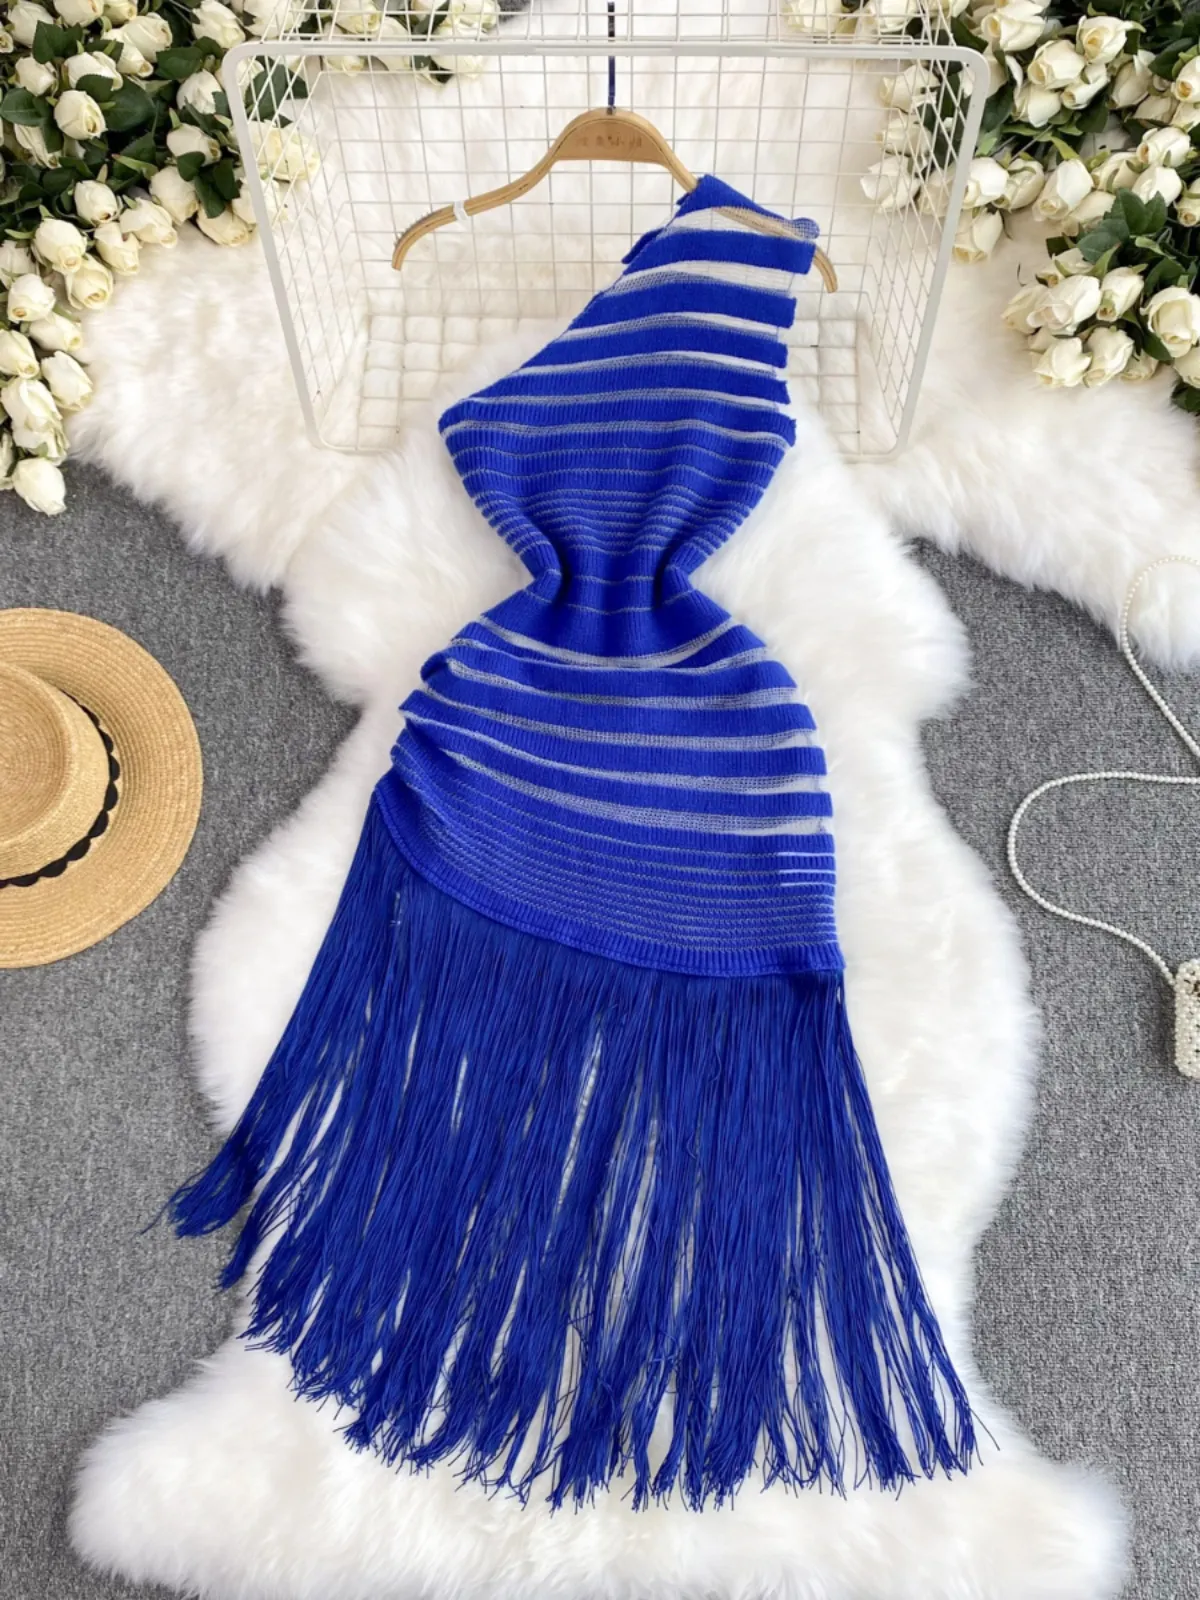 Sexy hollow out high slit dress for women's Instagram holiday wear Spicy girl slanted collar off shoulder slim fit fringe skirt